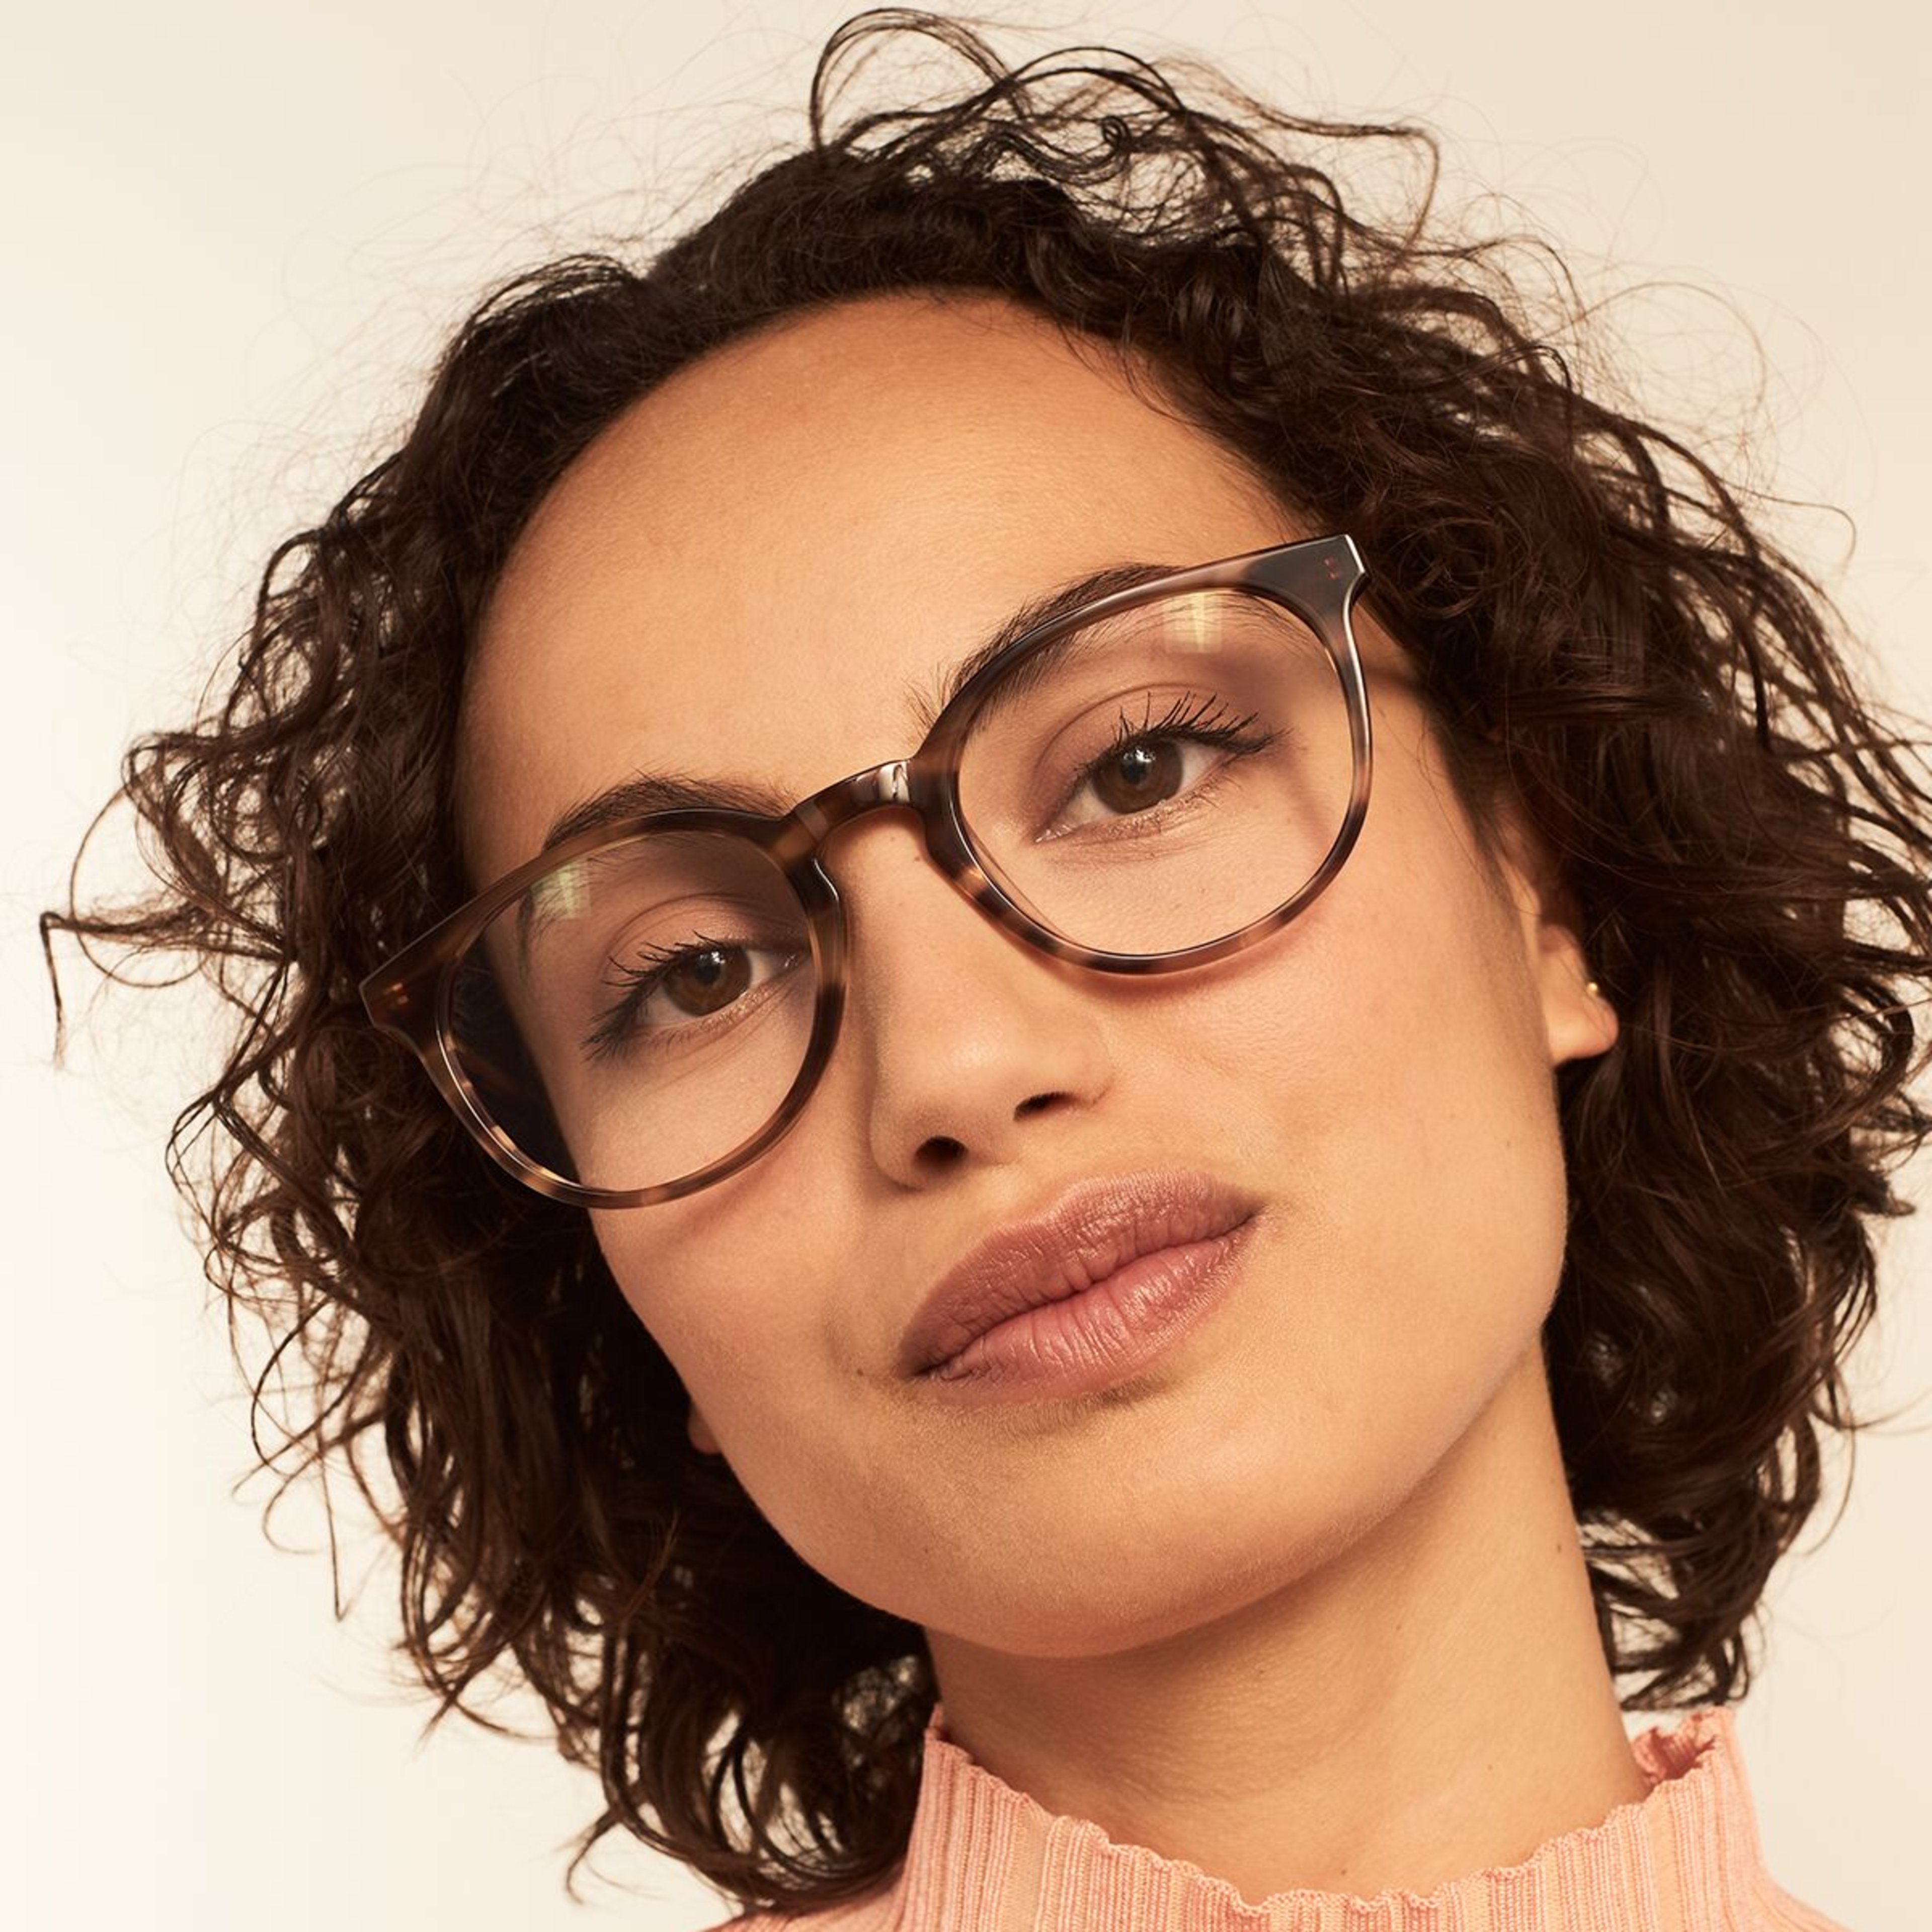 Ace & Tate Glasses | round acetate in Beige, Brown